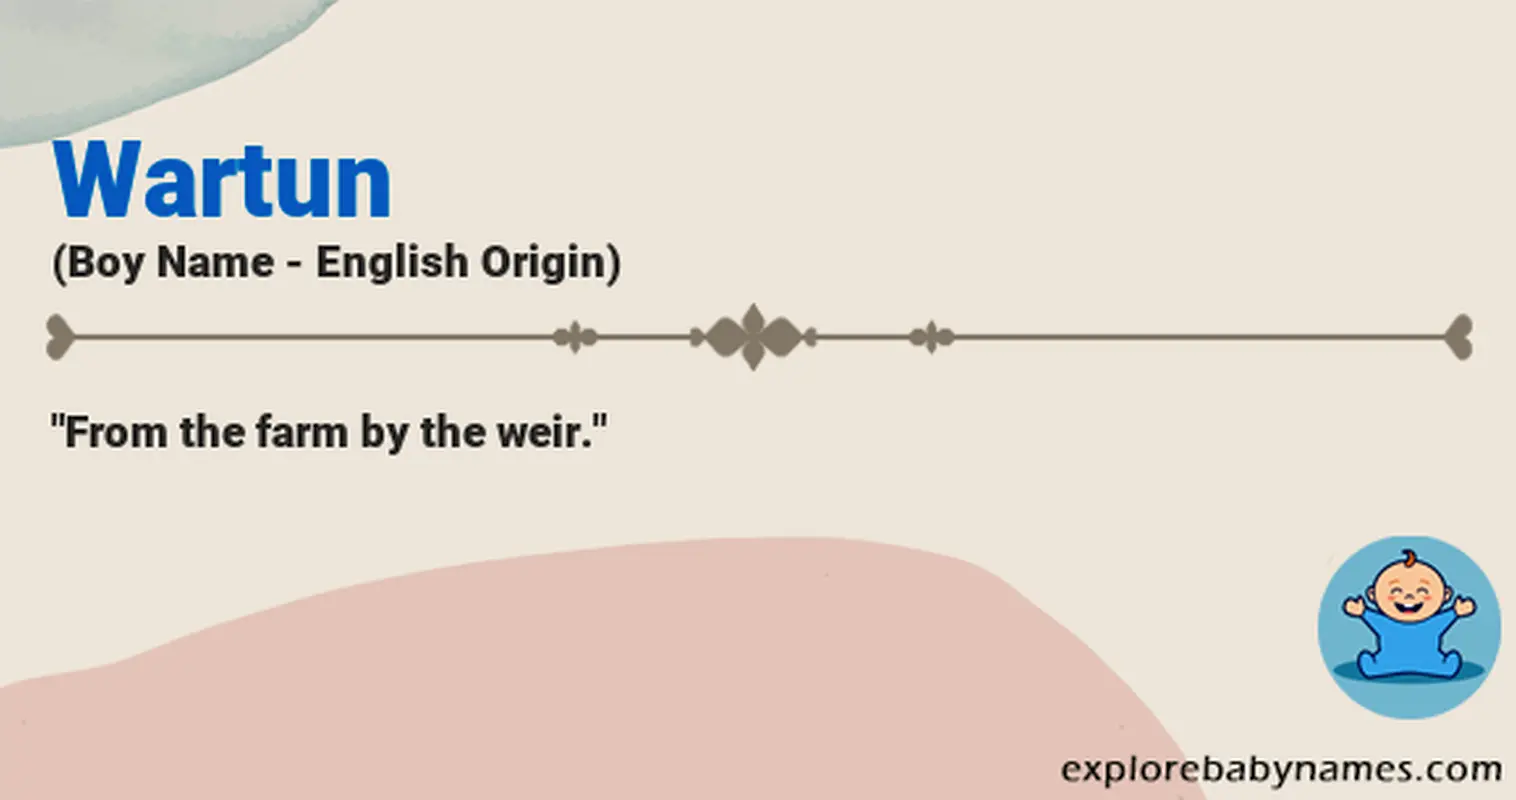 Meaning of Wartun